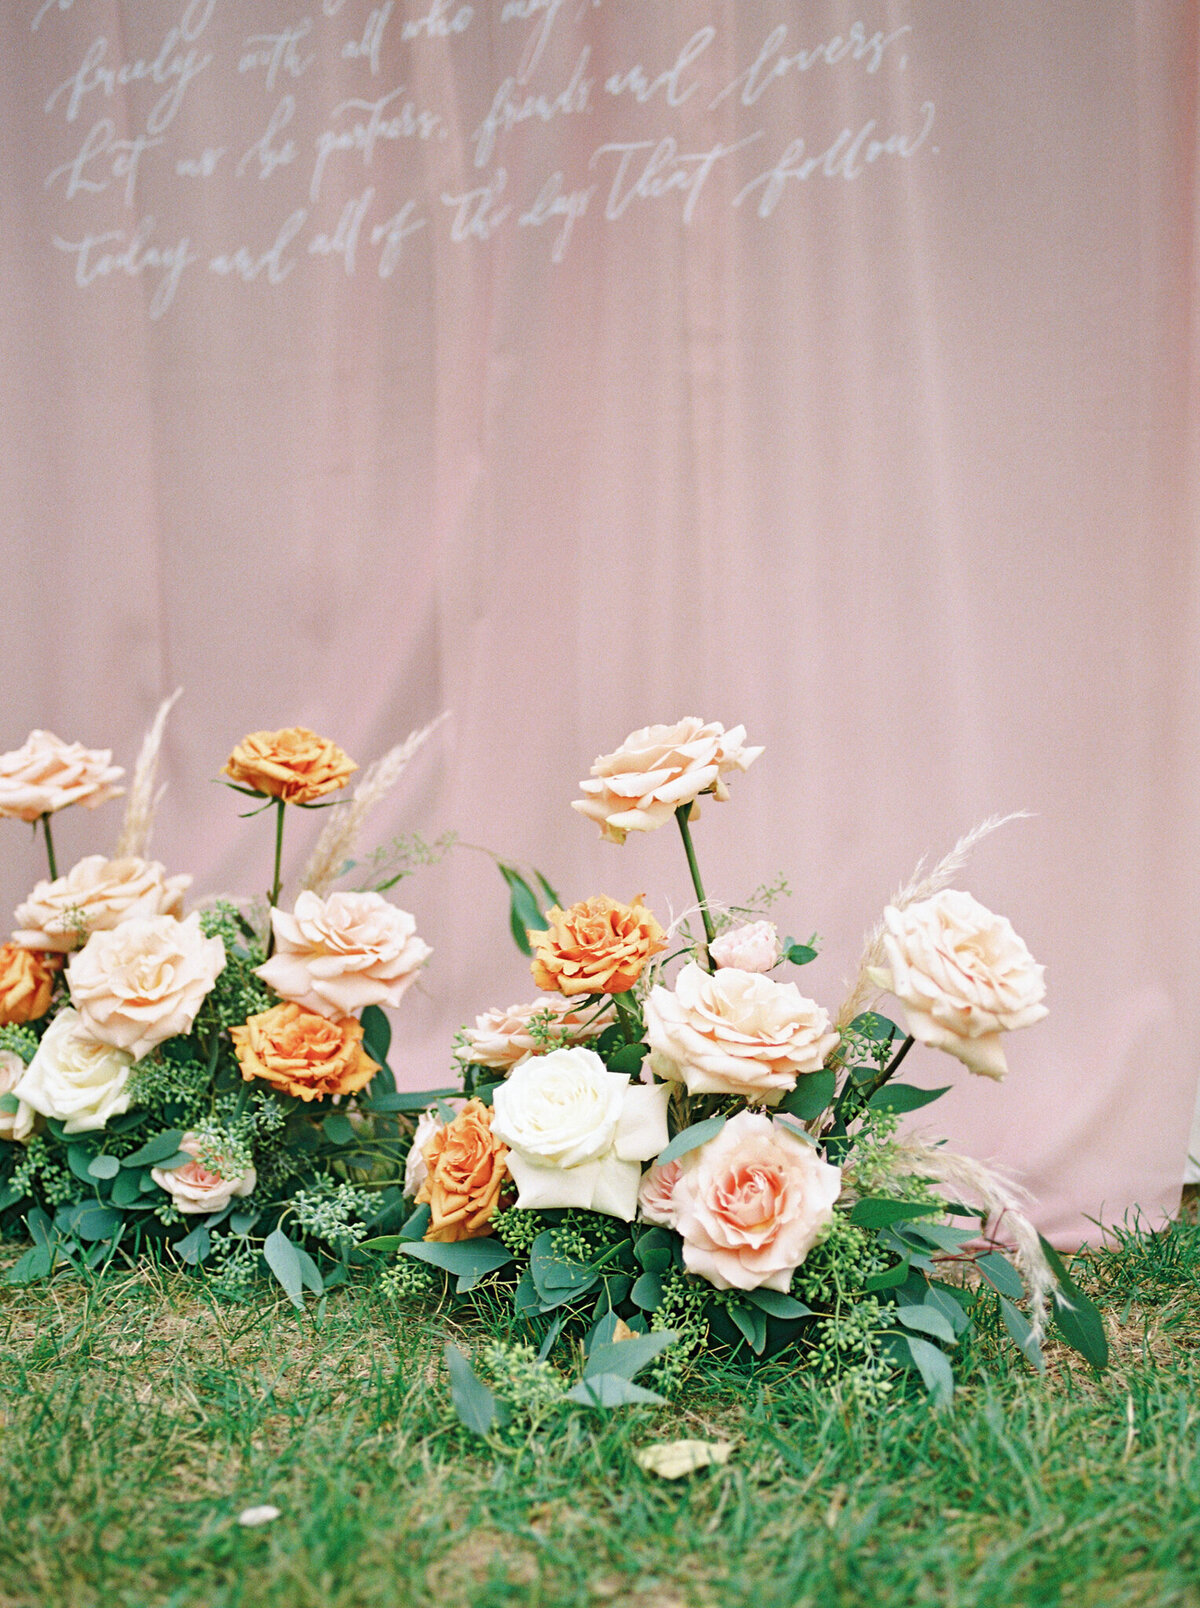 Gorgeous orange and pink wedding florals by Lovella Lifestyle, whimsical and romantic Edmonton wedding florist, featured on the Brontë Bride Vendor Guide.